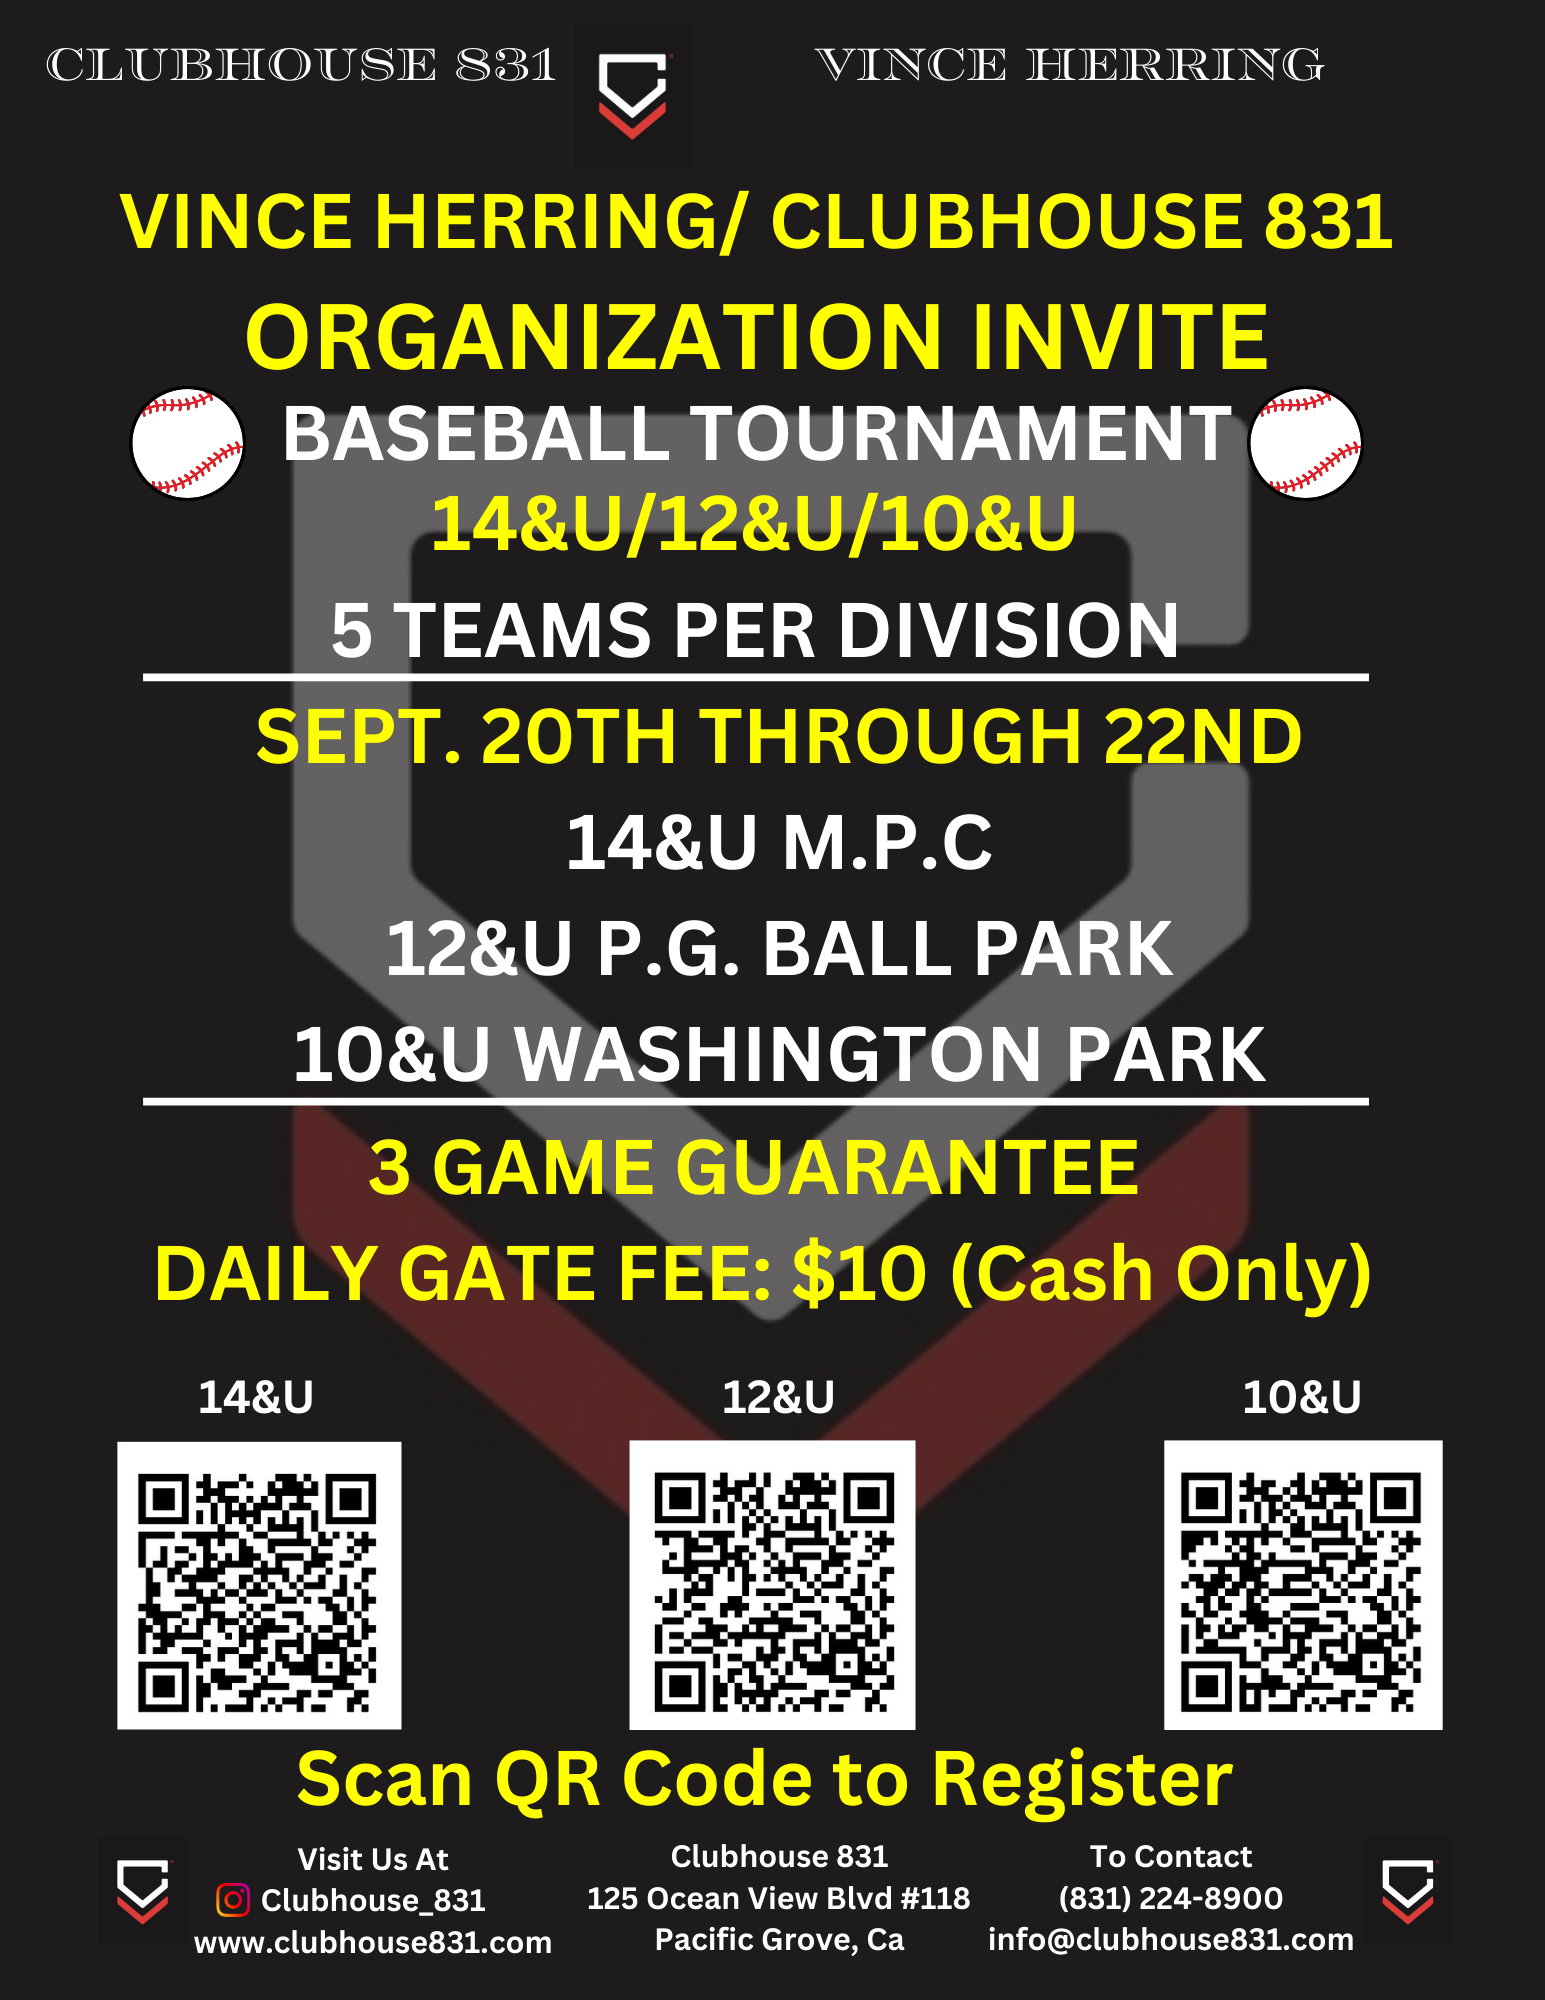 A poster for vince herring 's clubhouse baseball tournament